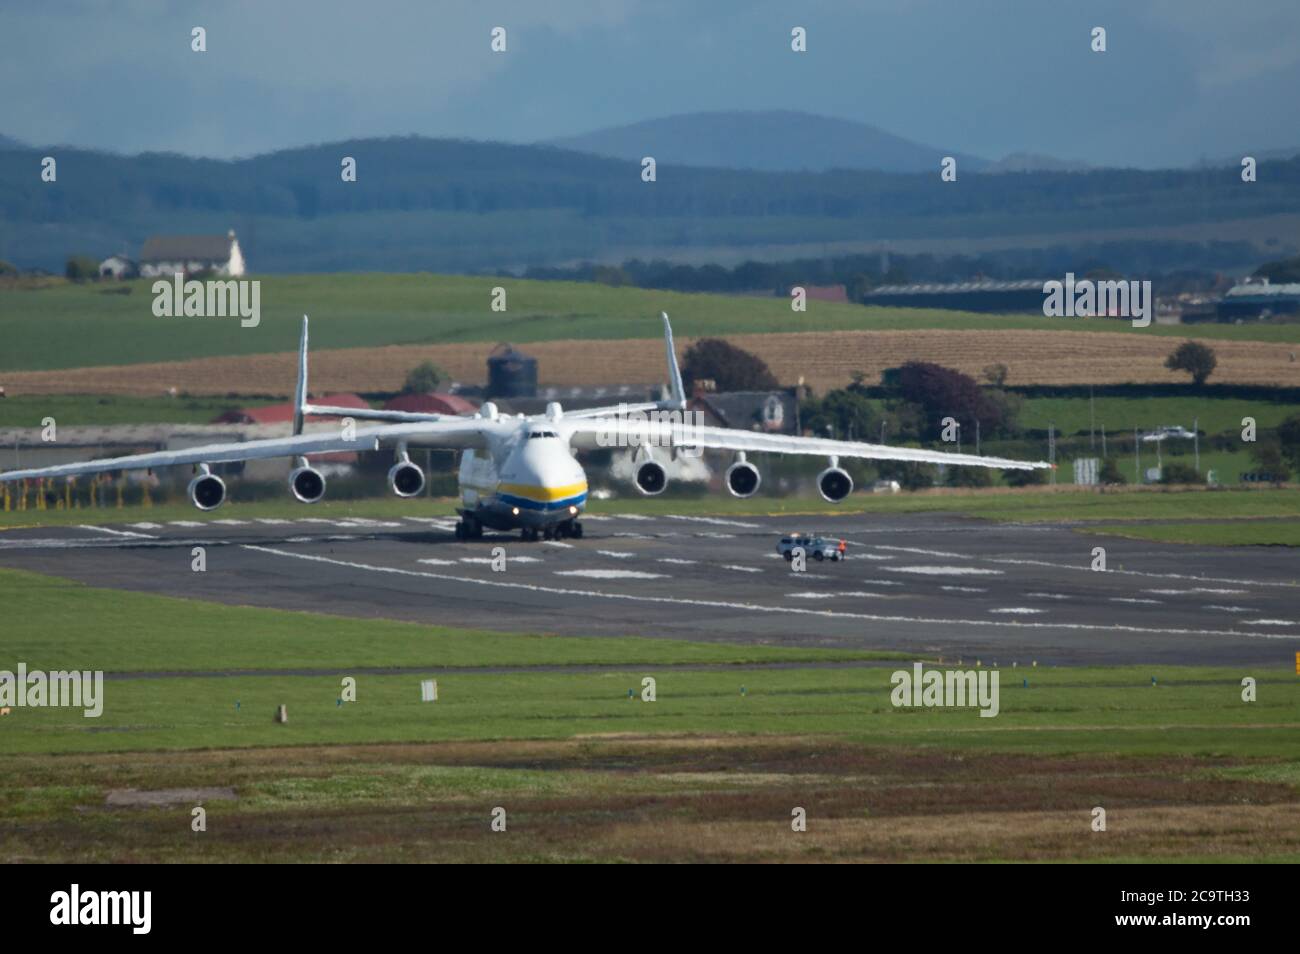 Prestwick, Scotland, UK. 2nd Aug, 2020. Pictured: Crowds of aviation enthusiasts and plane spotters turned out to see the Antonov An-225 Mryia (Reg UR-82060) make a scheduled departure after a refuelling stop at Glasgow Prestwick Airport from Bangor, USA before departing this afternoon for Châteauroux-Centre Airport in France. The giant strategic airlift cargo plane behemoth is powered by six massive Six Ivchenko Progress Lotarev D-18T three shaft turbofan engines, has a maximum takeoff weight of 640 tonnes. Credit: Colin Fisher/Alamy Live News Stock Photo